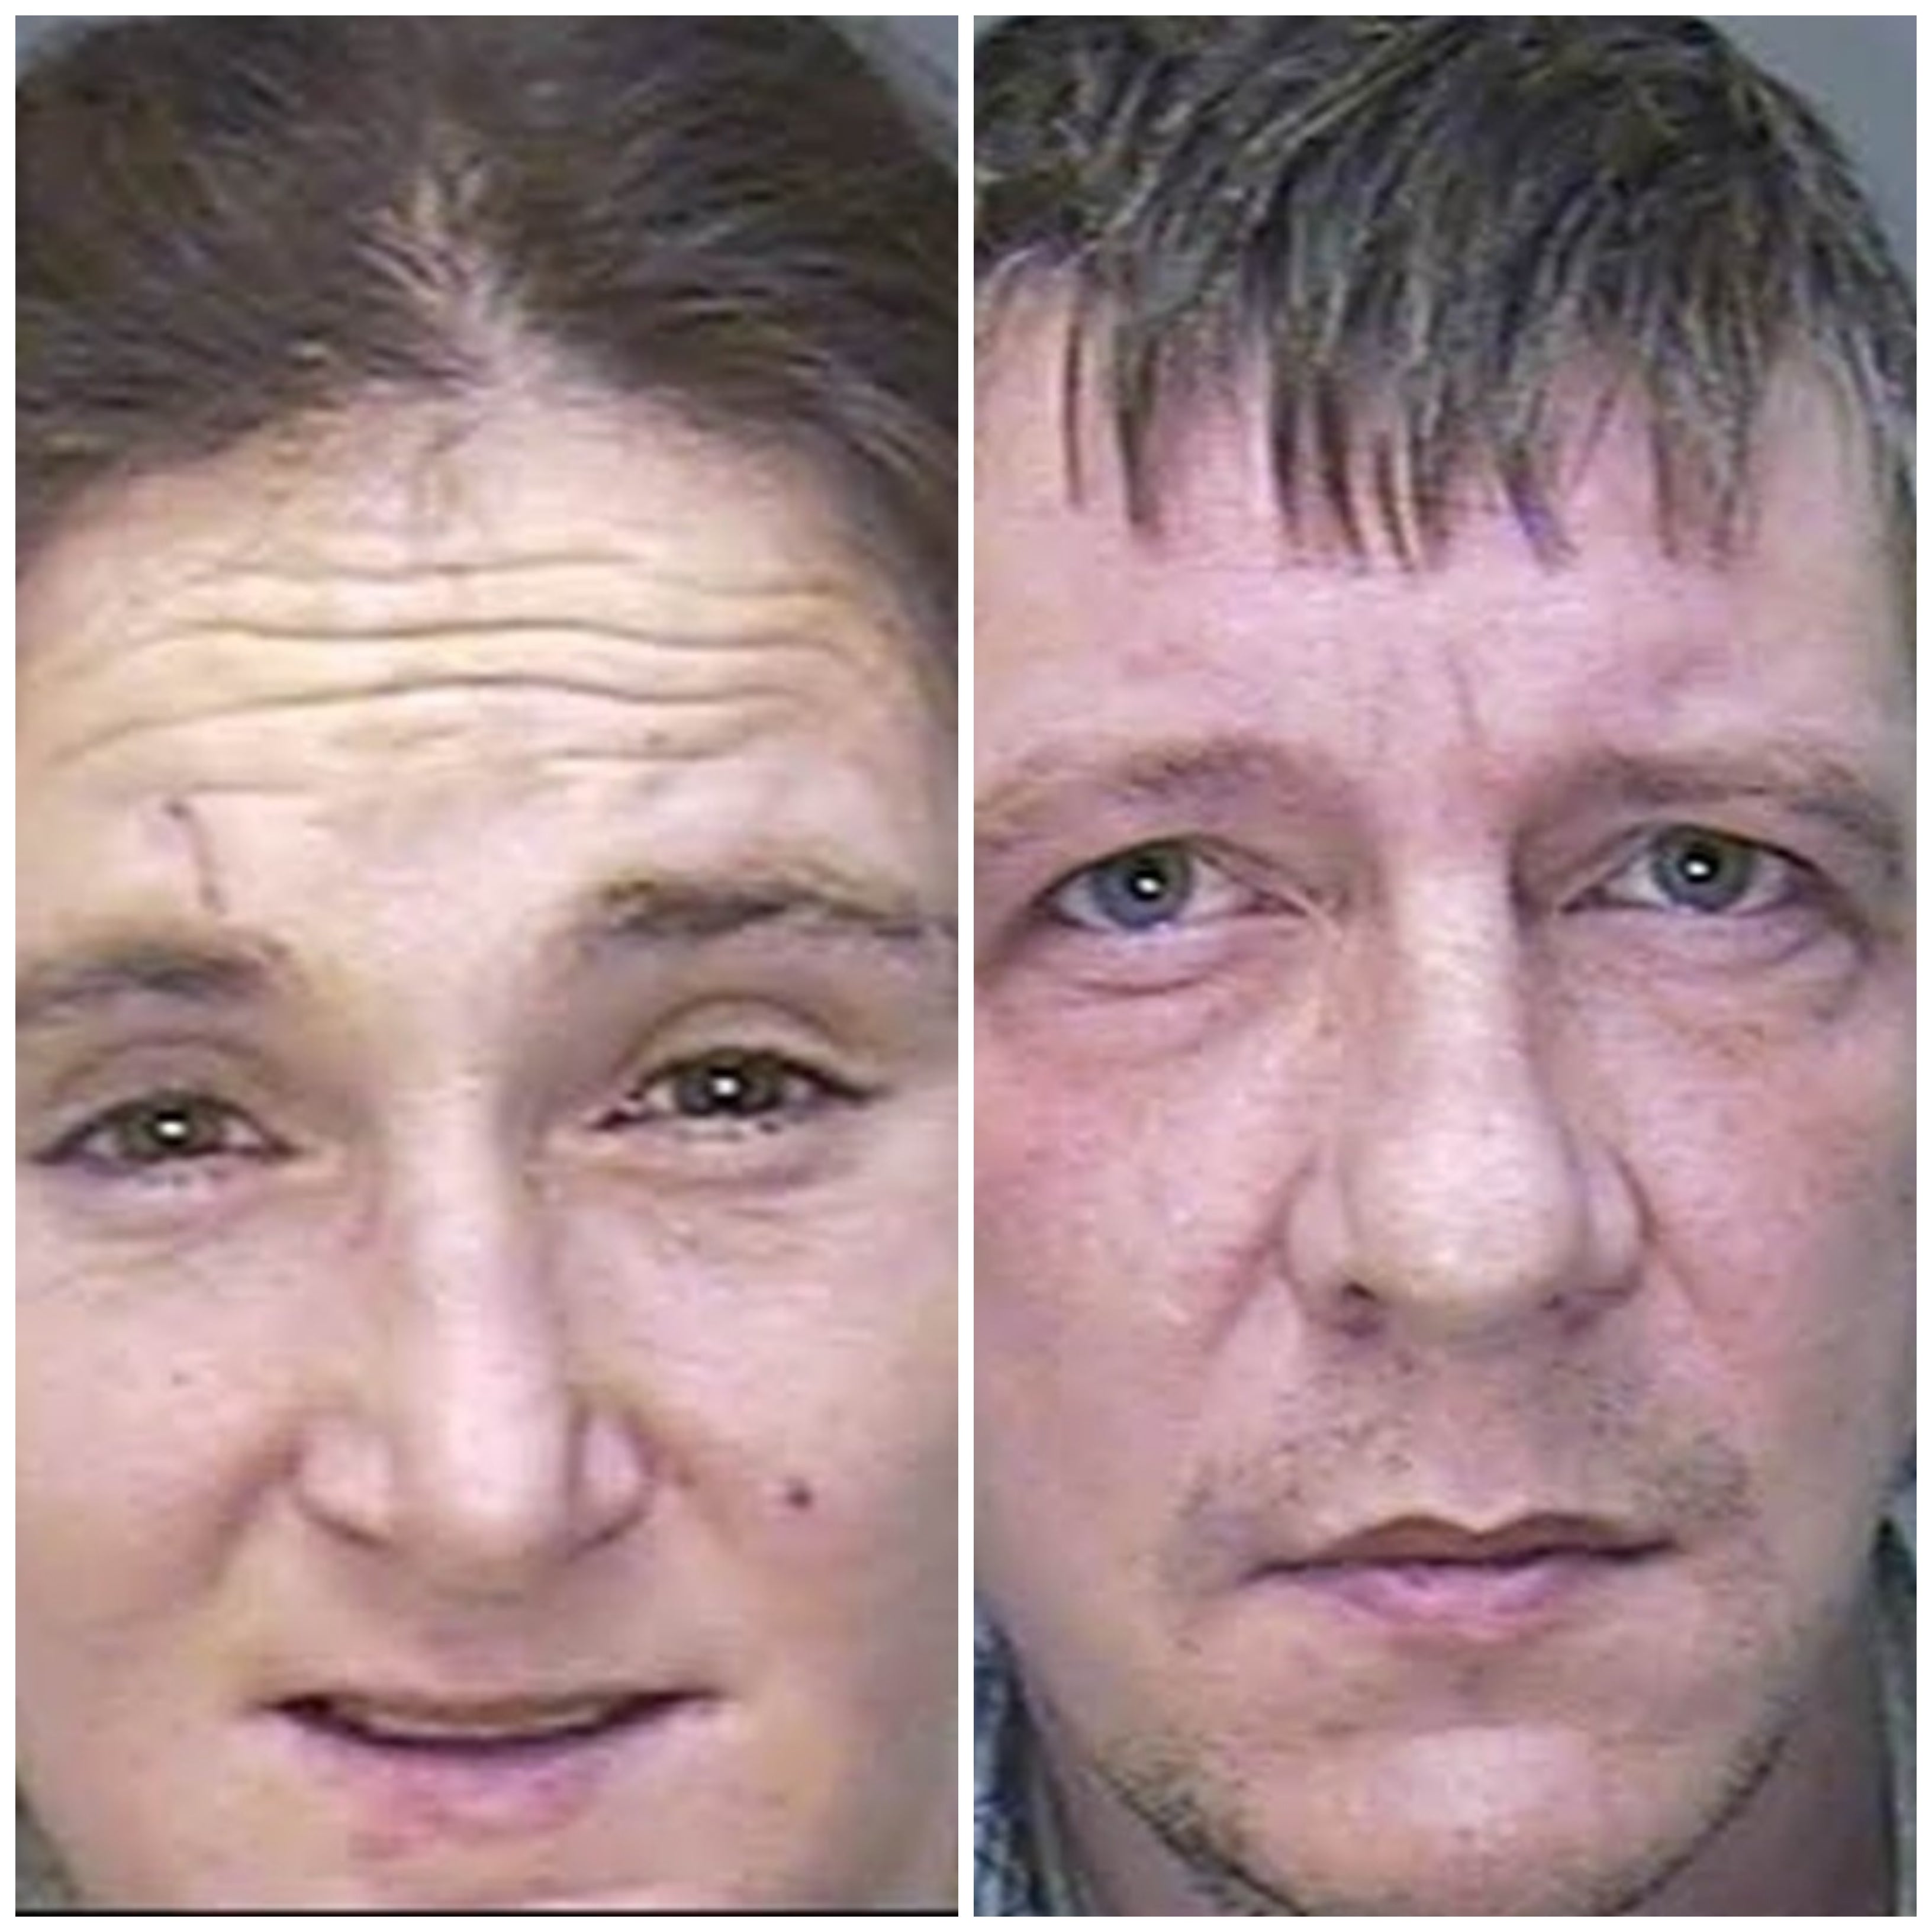 Jodie Swannick, 32, who has been jailed, along with her partner Lee Chugg, 42, for a combined total of 38 years in prison after murdering a vulnerable, charity shop volunteer (Devon and Cornwall Police/PA)